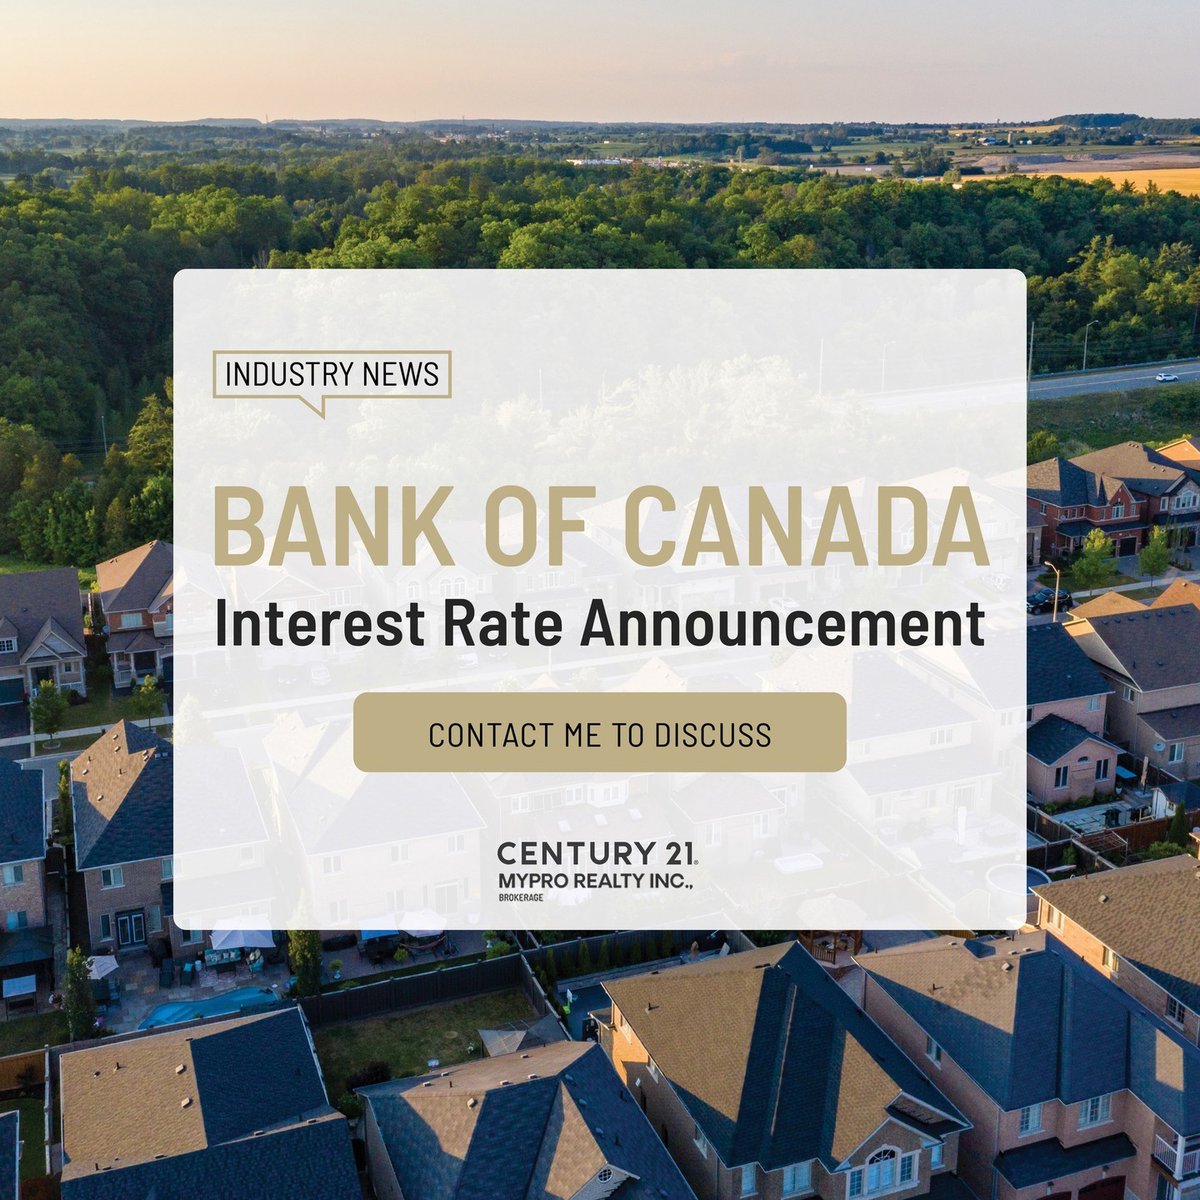 📣The Bank of Canada made their latest interest rate announcement recently. 📣
Contact Century 21 MyPro Realty for any questions or assistance in navigating the current market. 🏡

#InterestRate #TorontoRealEstate #TorontoHomes #TorontoRealtor #TorontoProperties